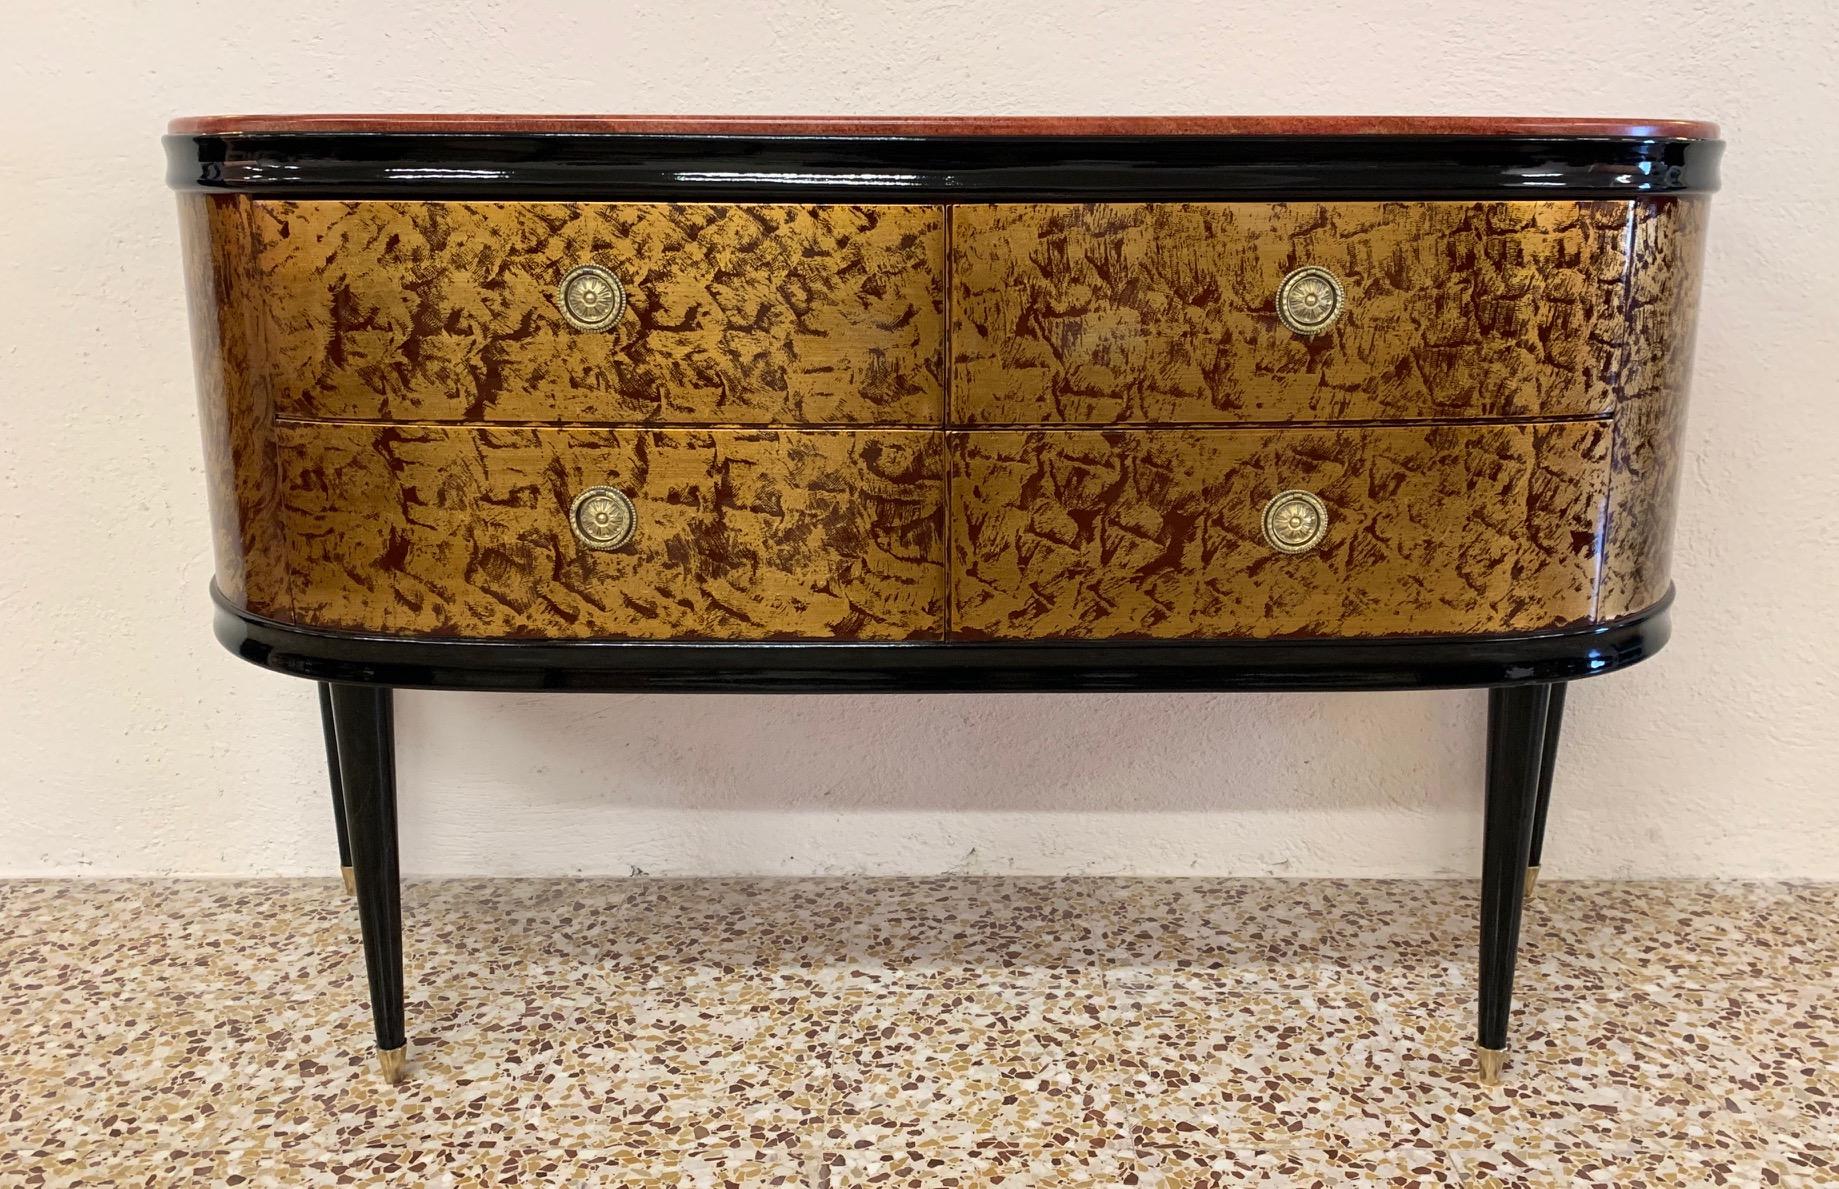 This dresser was produced in Italy in the 1940s.
Chest of drawers is red lacquered with a gold leaf decoration while the handles and details are in brass.
Top is in elegant red marble.